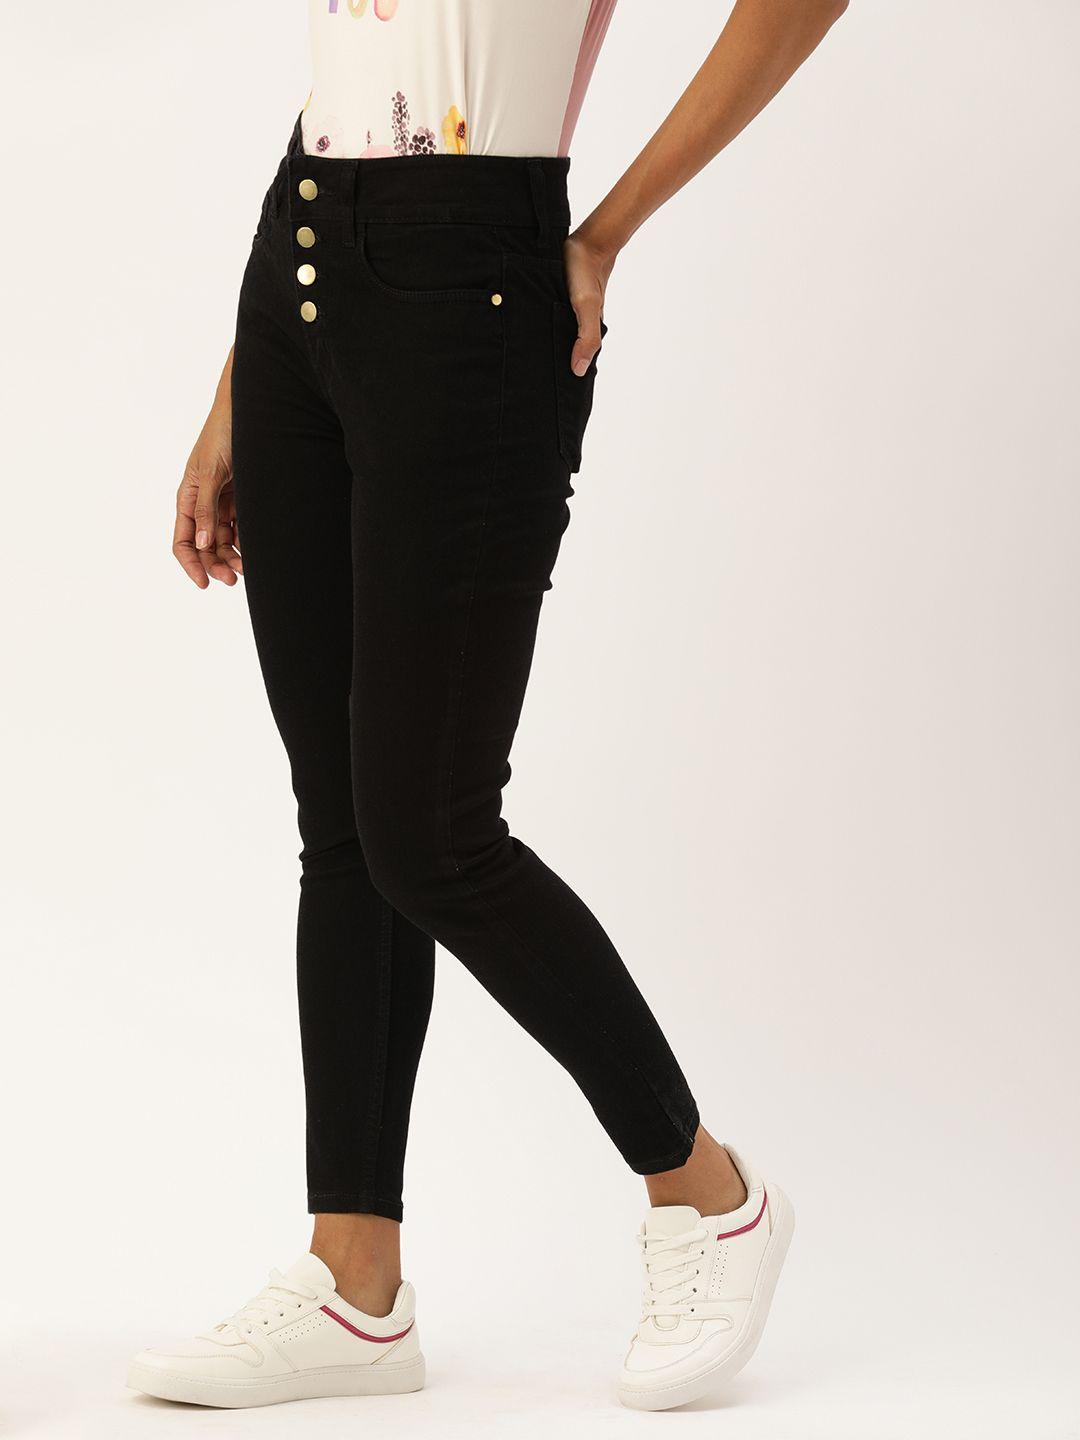 dressberry-women-black-skinny-fit-high-rise-clean-look-cropped-jeans